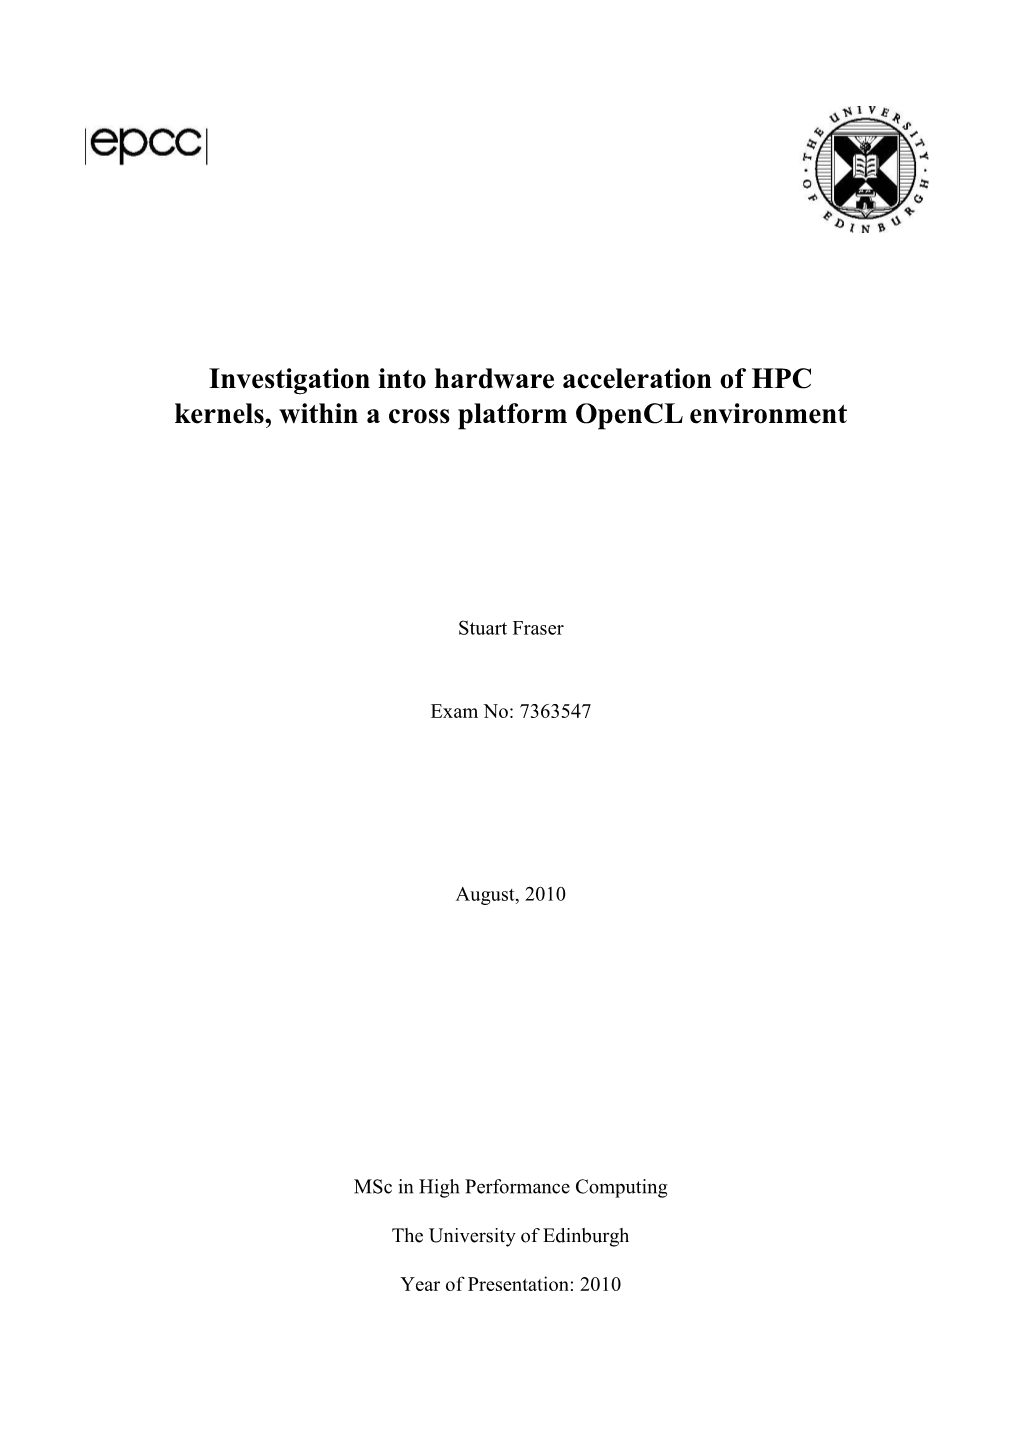 Investigation Into Hardware Acceleration of HPC Kernels, Within a Cross Platform Opencl Environment